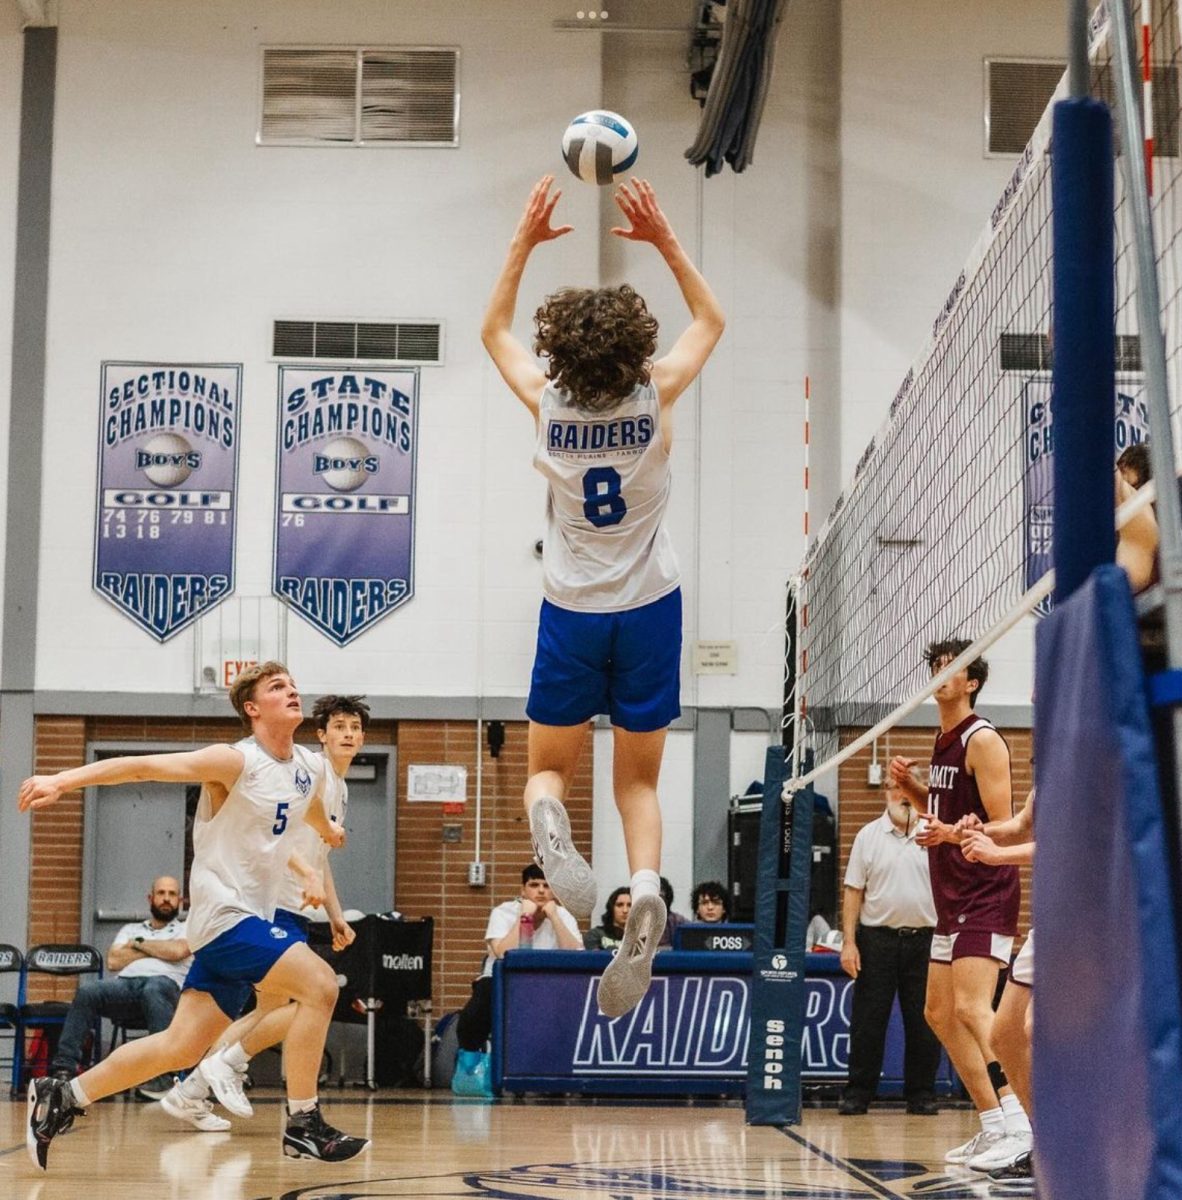 Senior+Quinn+Donahue+%288%29+sets+the+ball+for+senior+hitter+Tim+Ennis+%282%29+who+is+getting+ready+to+spike+the+ball.+The+Scotch+Plains-Fanwood+boys+volleyball+defeated+the+Summit+Hilltoppers+on+April+16.+